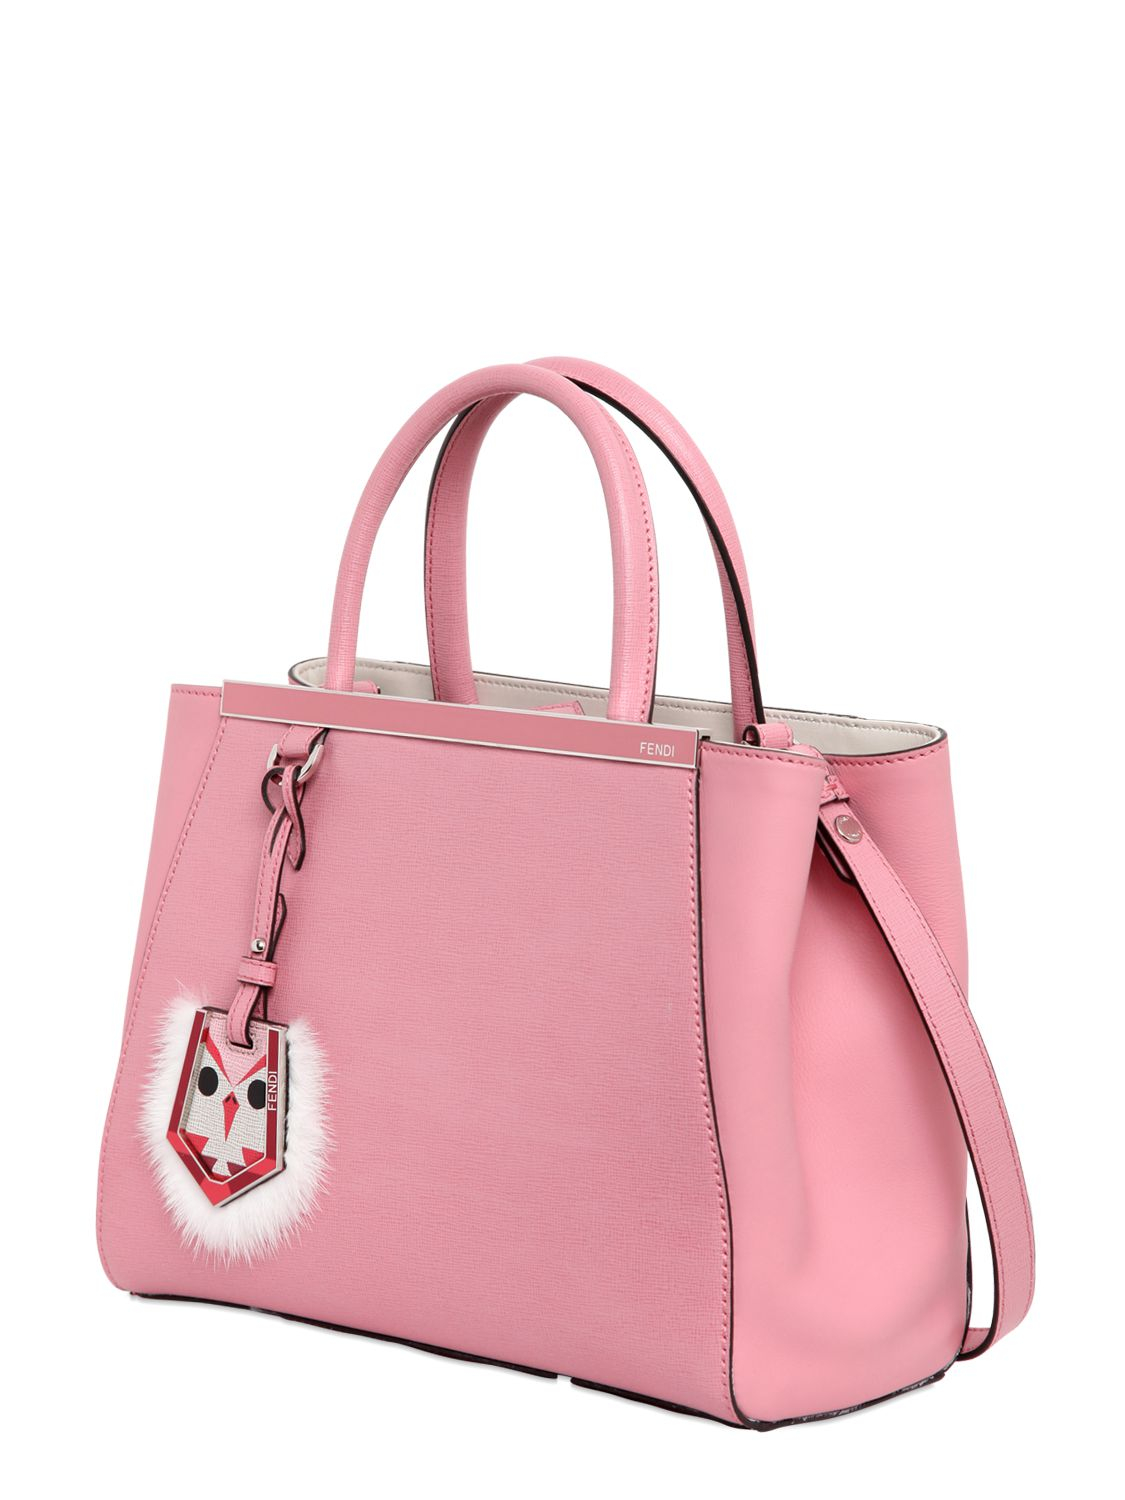 Lyst - Fendi Mini 2Jours Bag With Bird Detailing in Pink